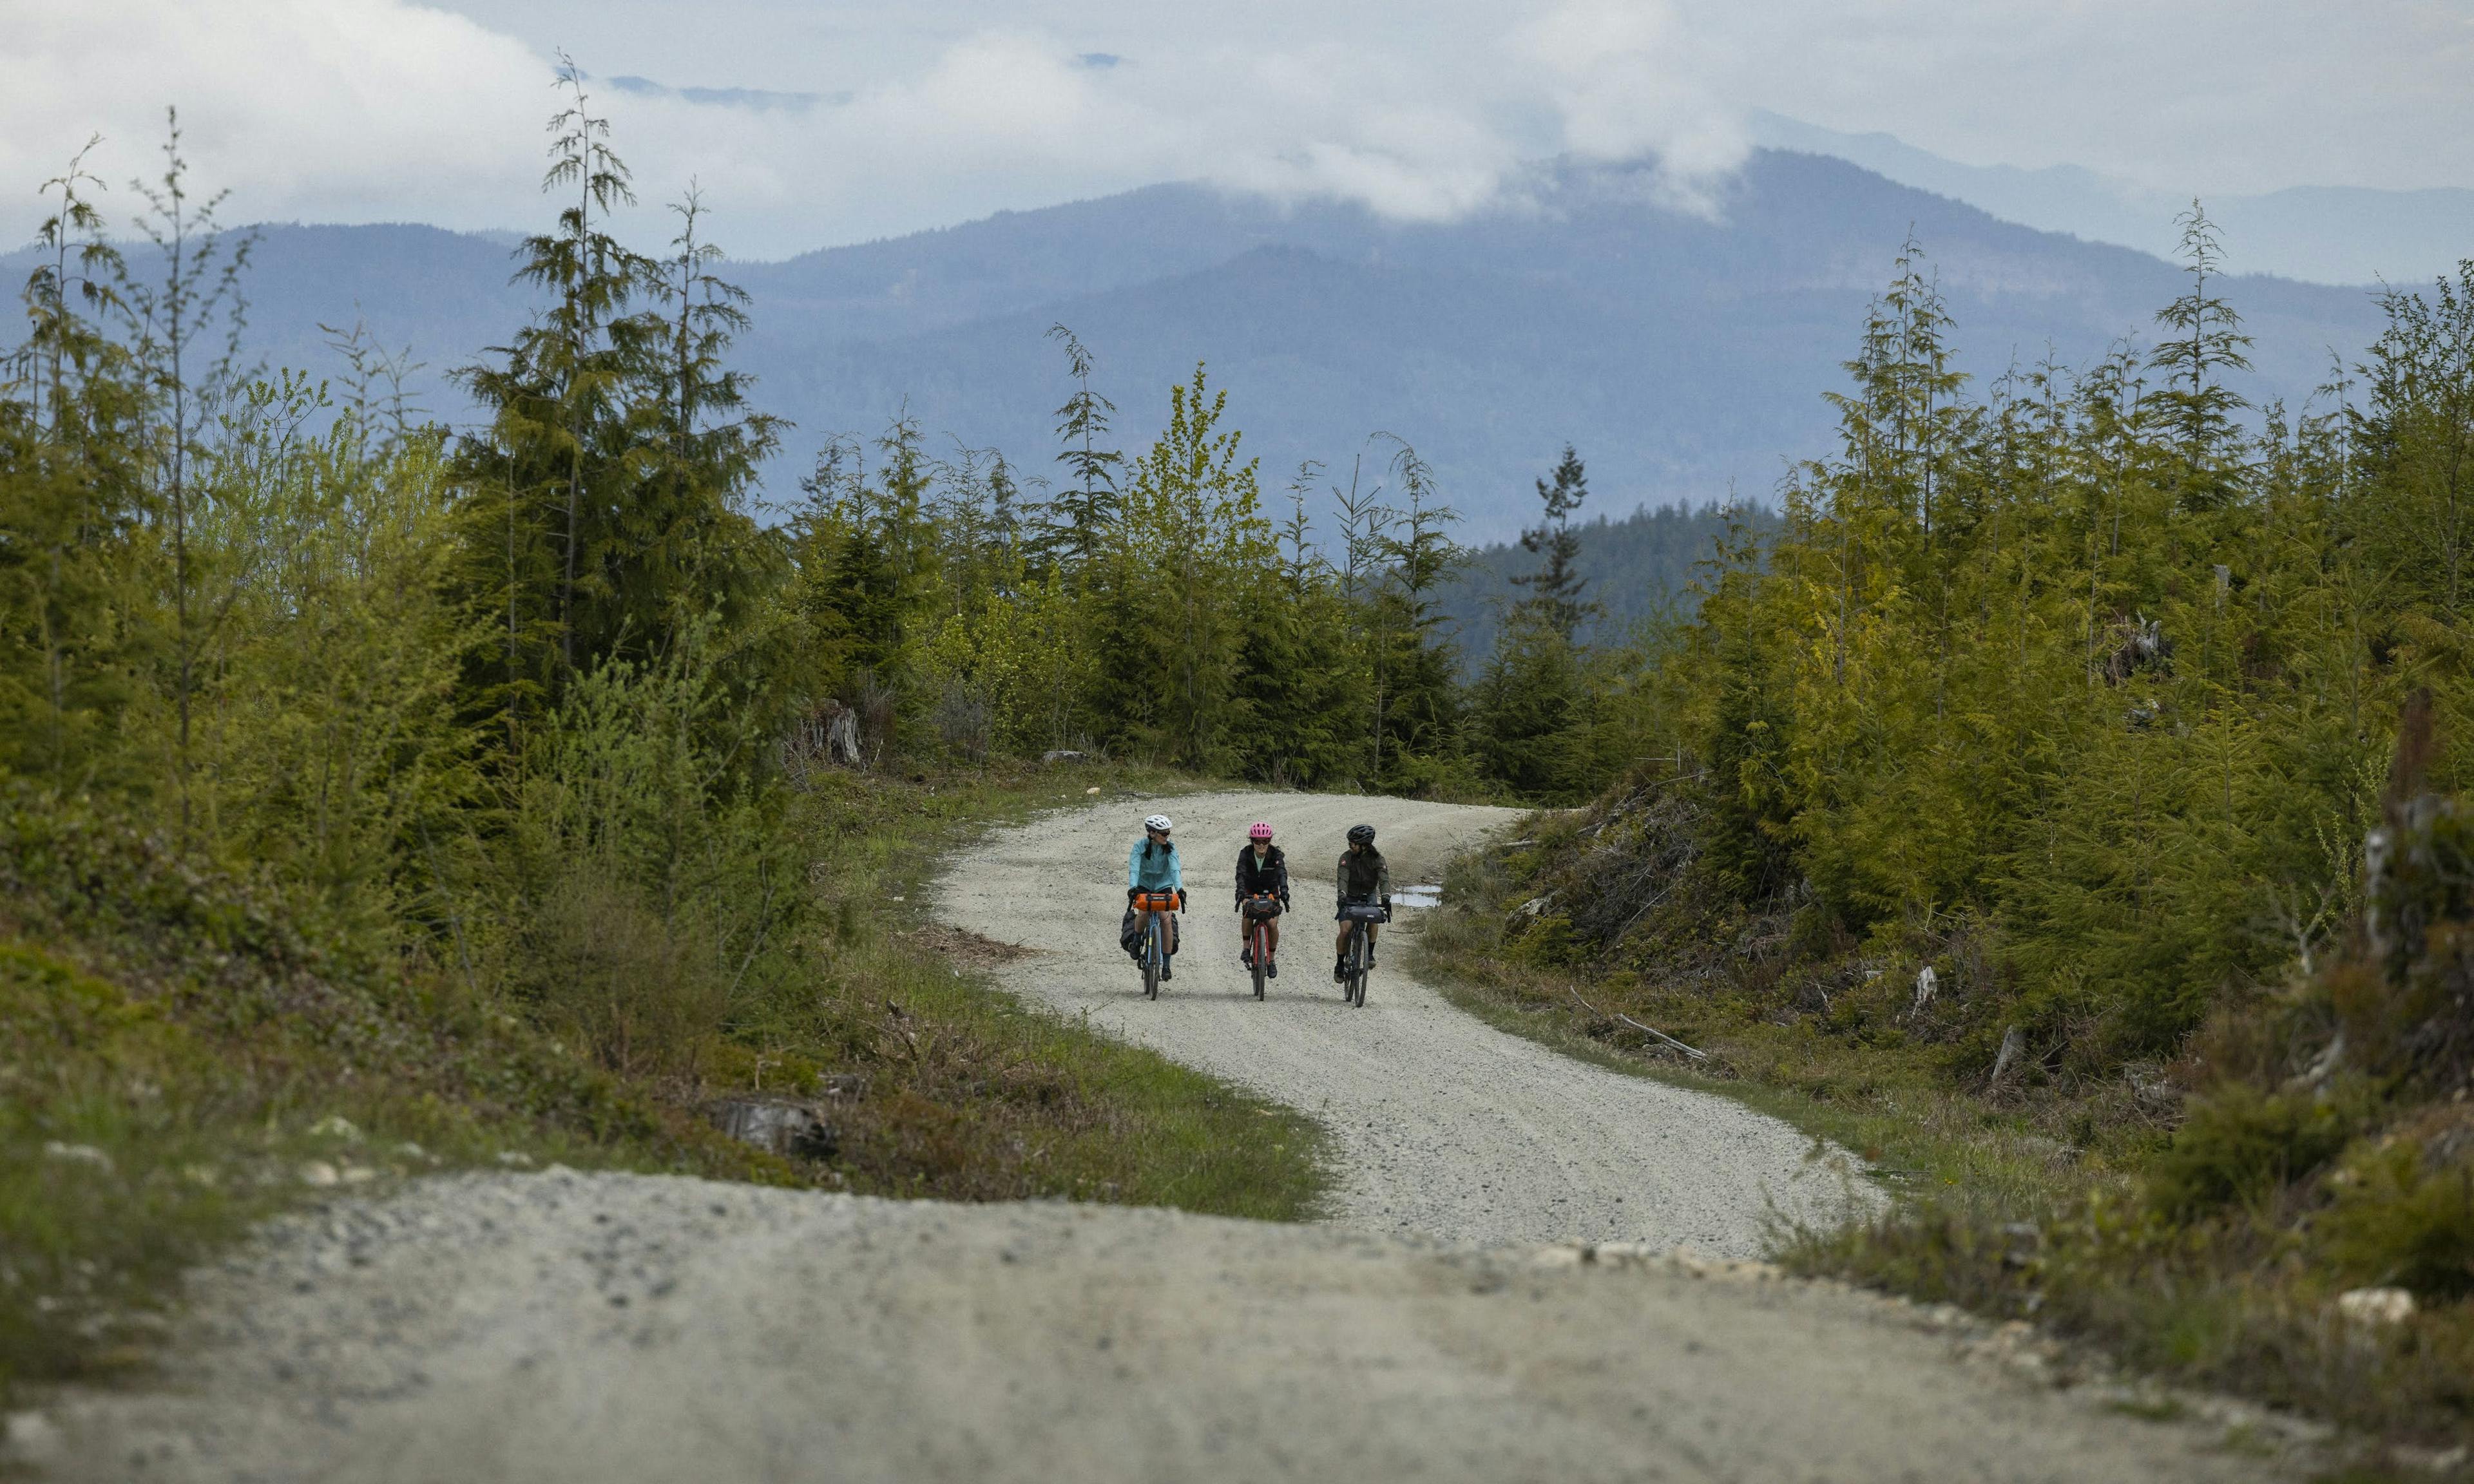 Three cyclists riding on a gravel road with mountain scenery in the background